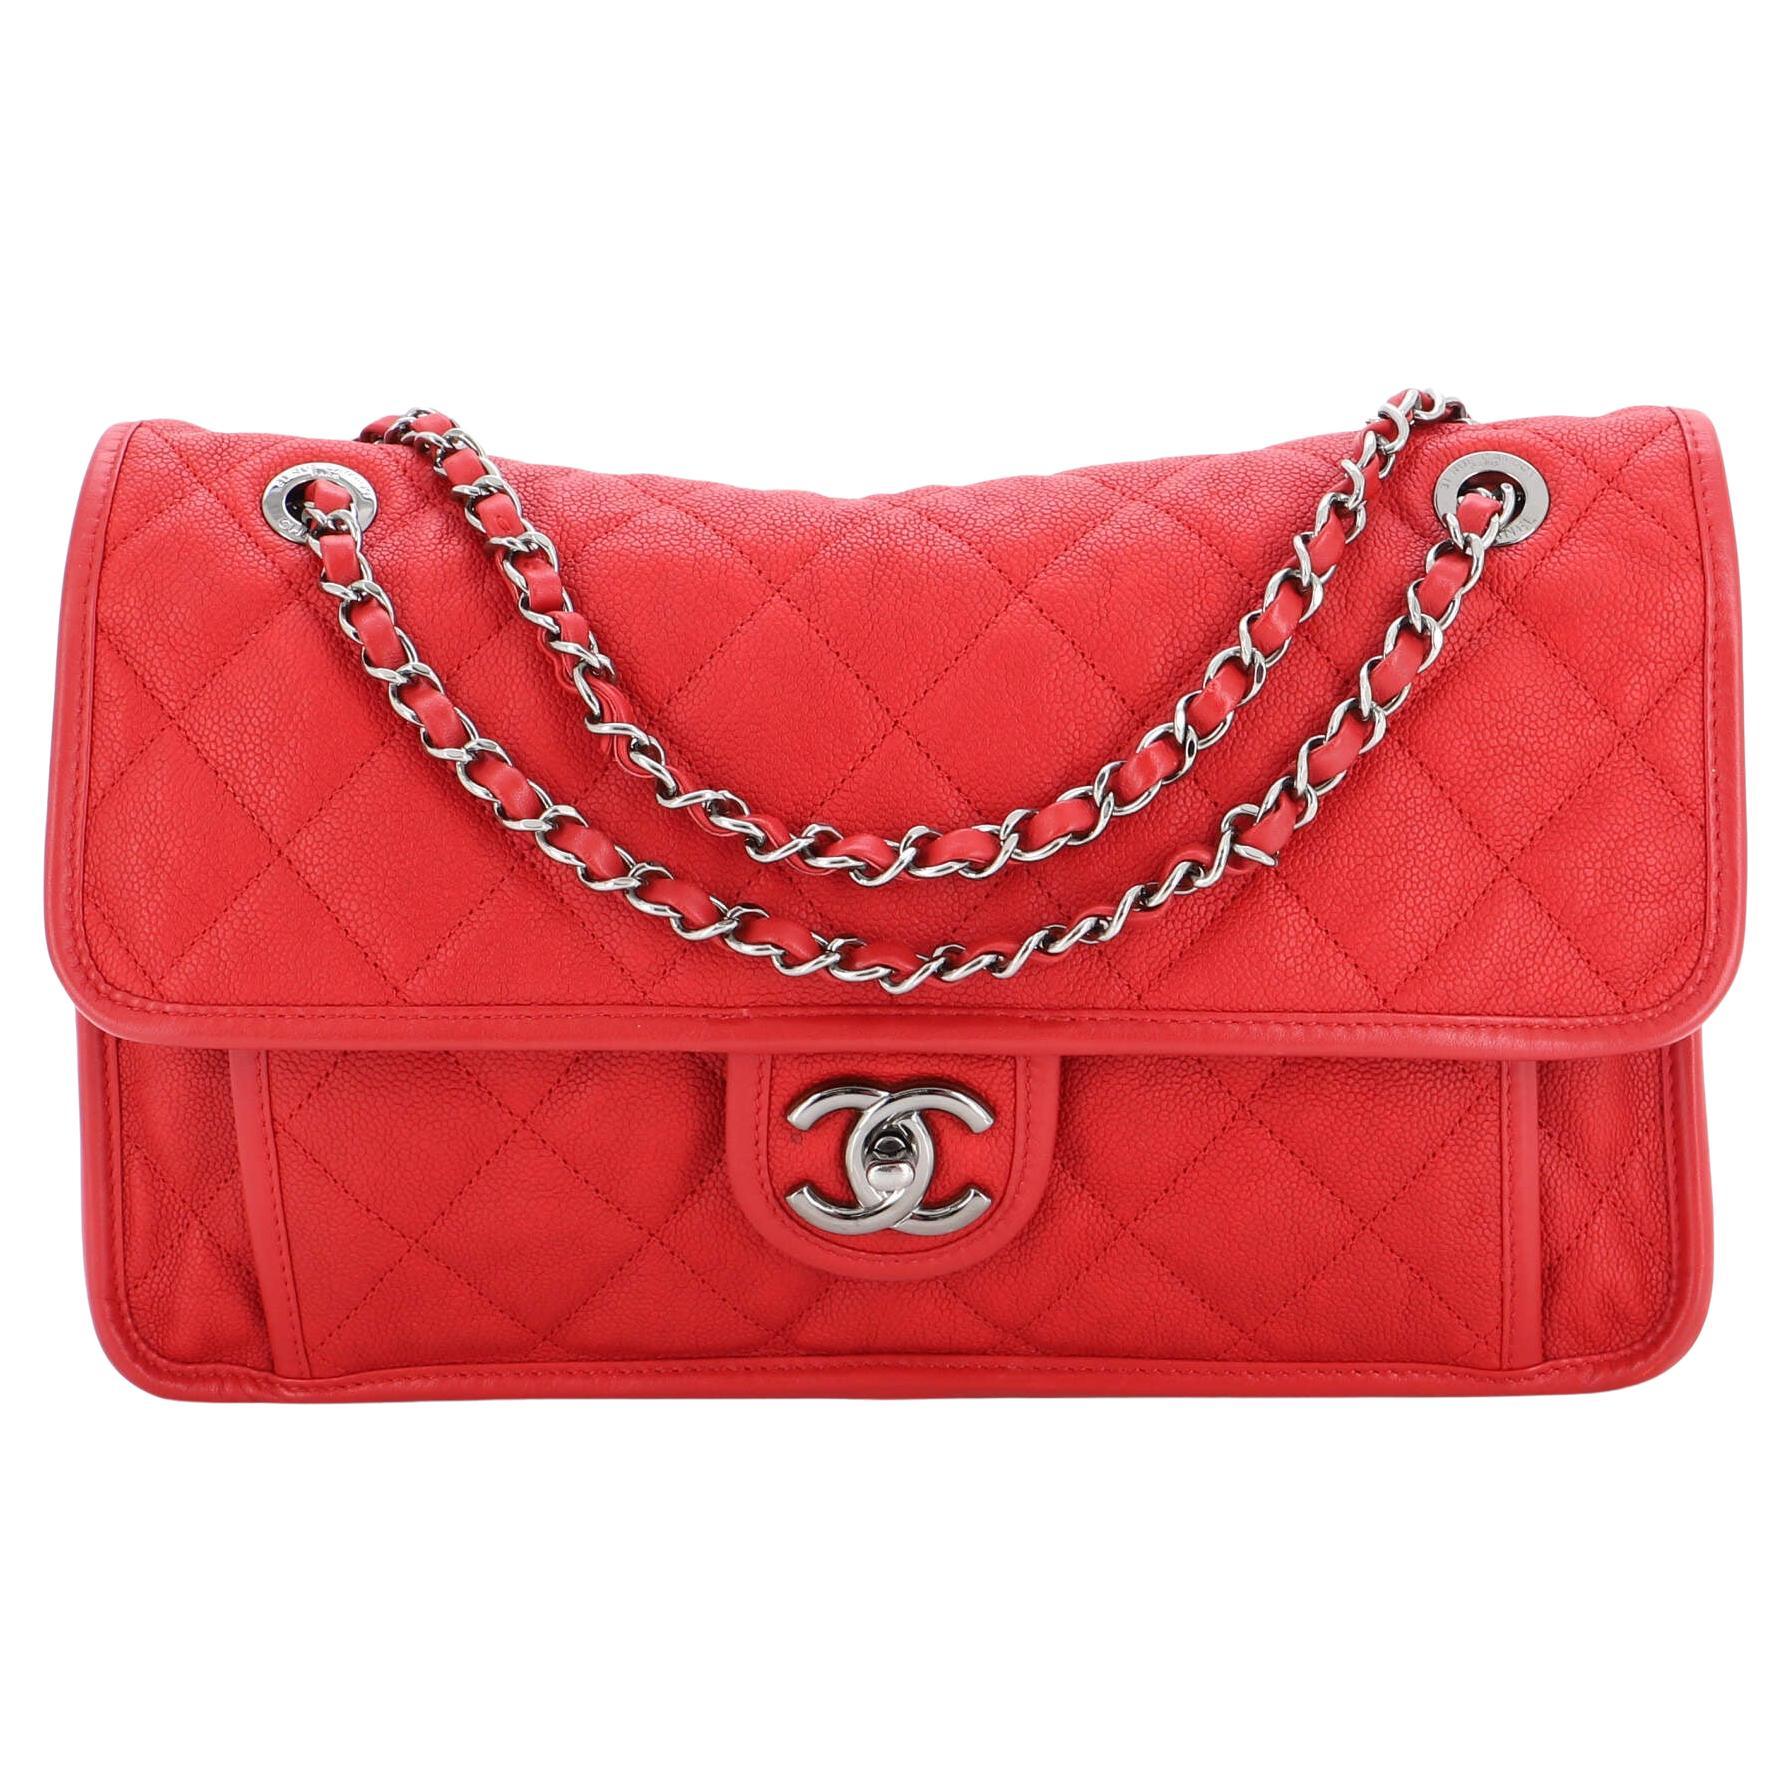 CHANEL Riviera Flap Large Quilted Caviar Leather Bag